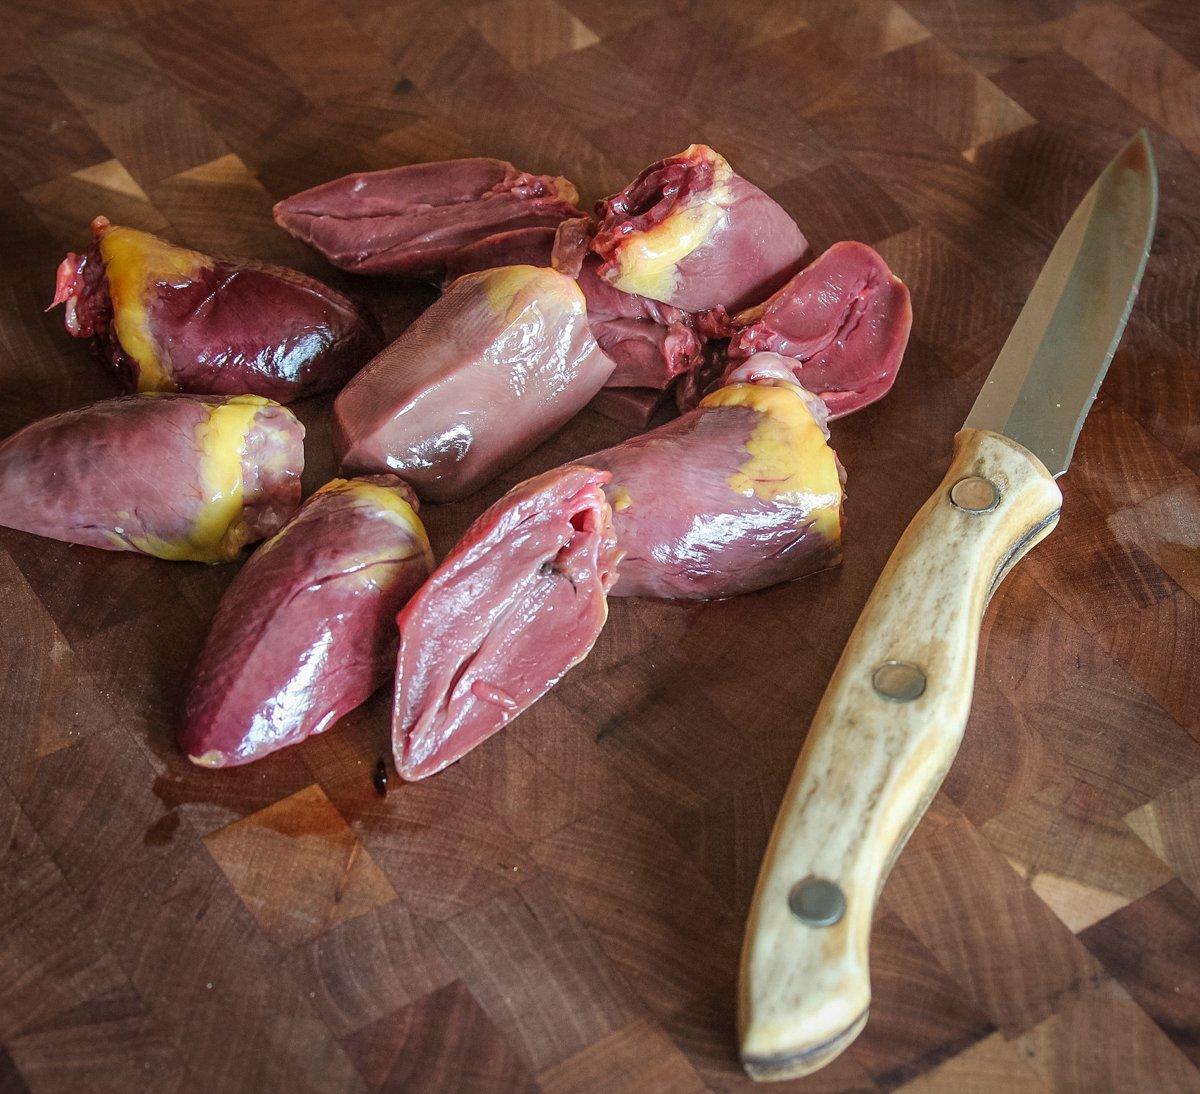 Slice the hearts in half and trim away any connective tissue before marinating.